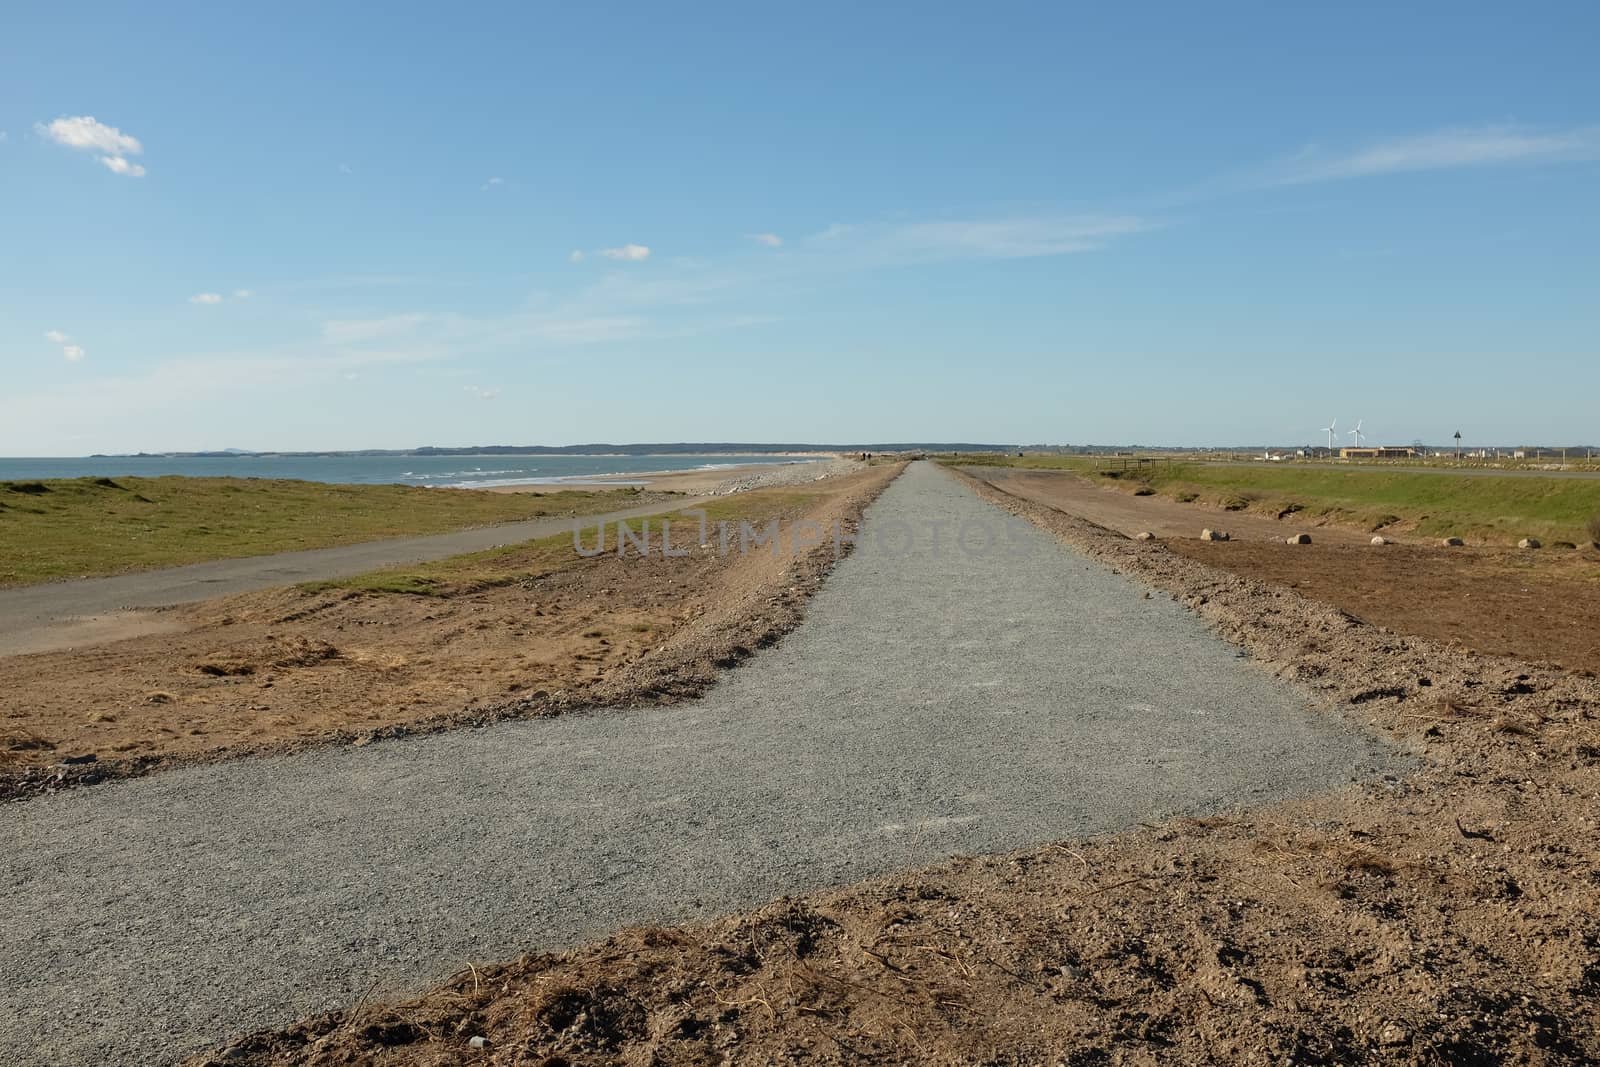 A newly layed gravel footpath on raised earth extends to the horizon with the sea in the distance.